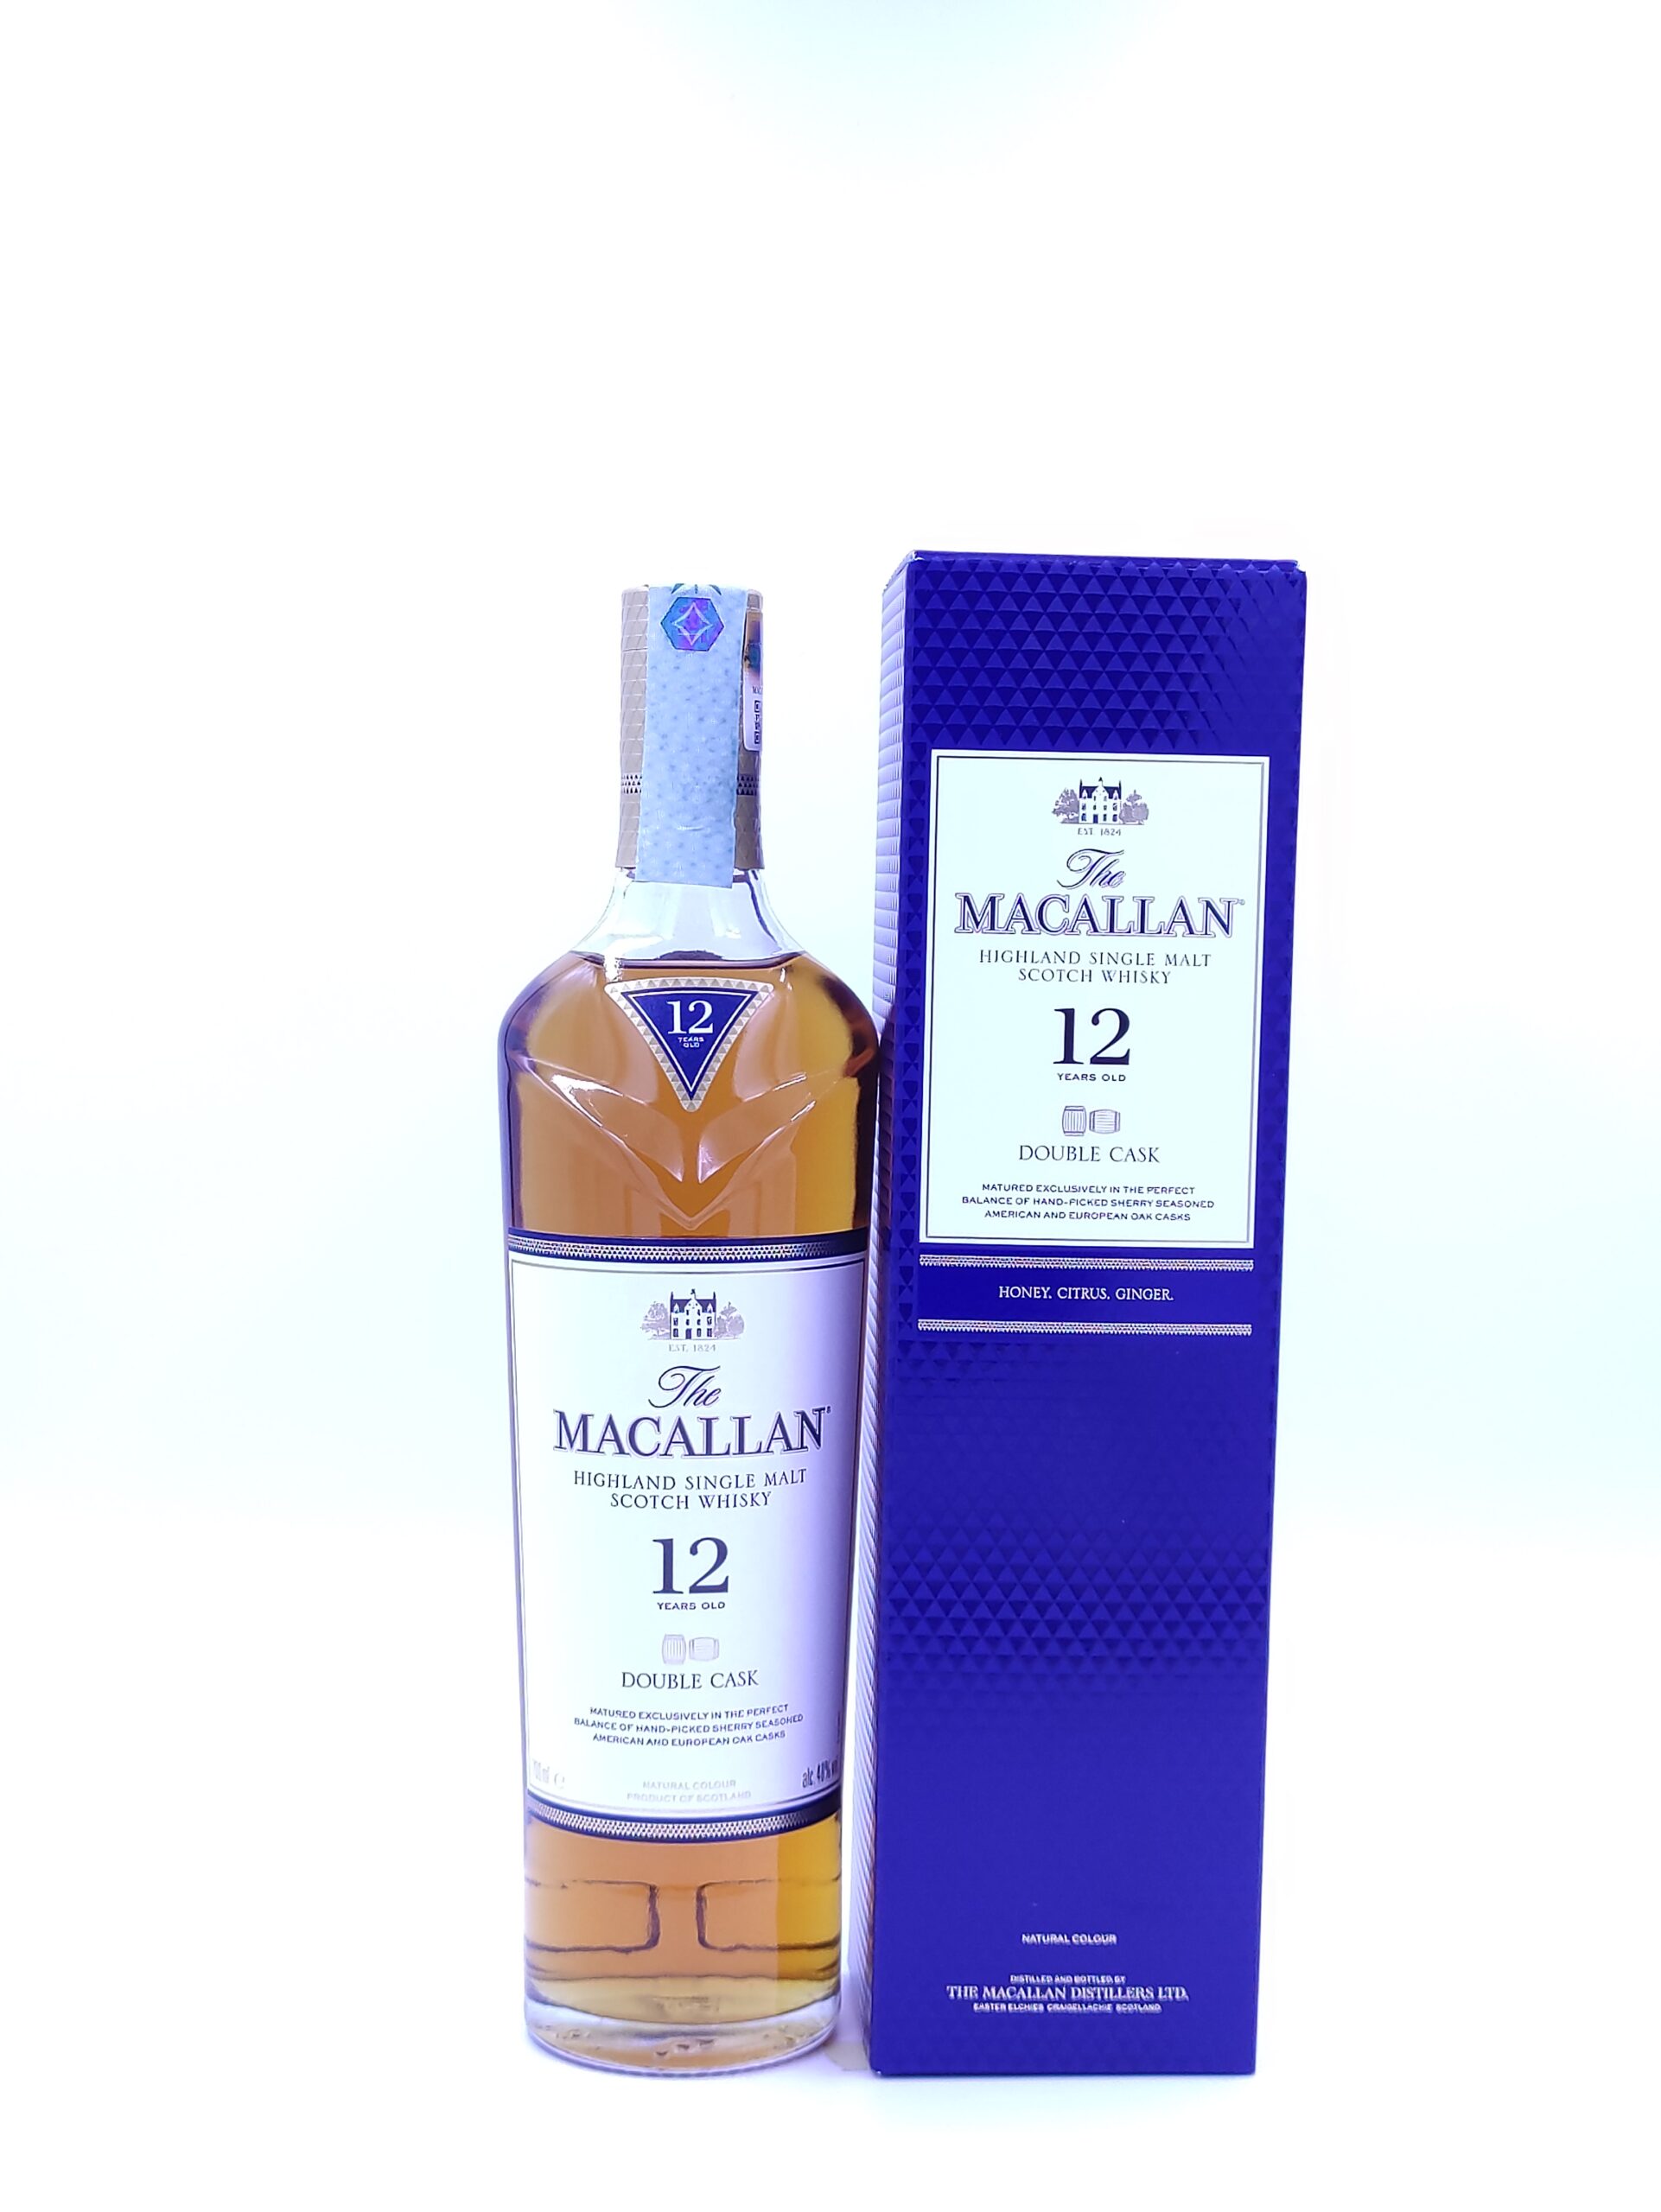 THE MACCALLAN 12 Years Old DOUBLE CASK CL. 70 (Astucciato)